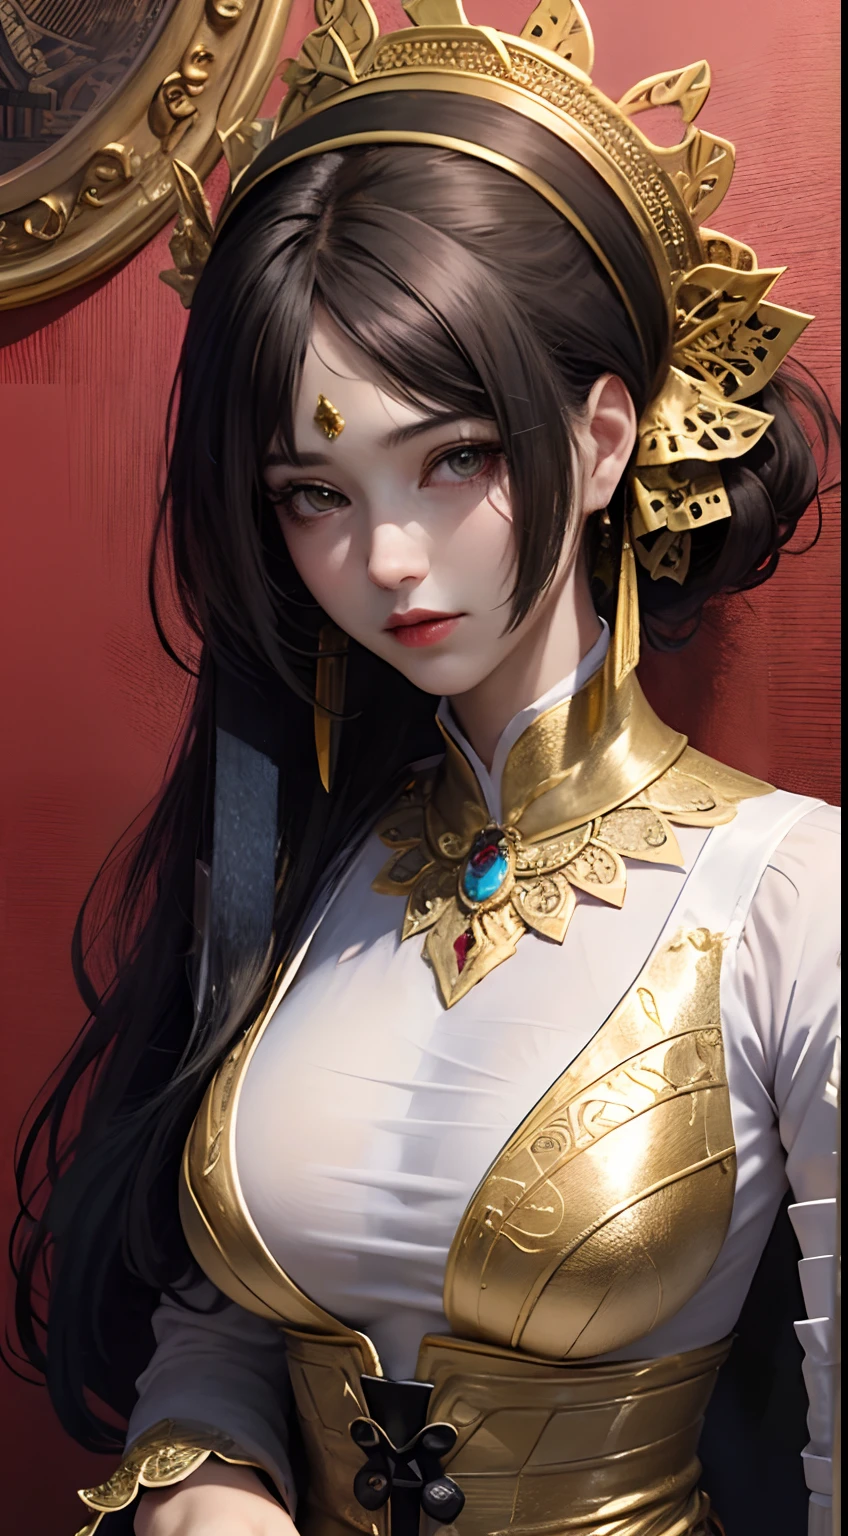 （tmasterpiece，top Quority，best qualtiy，offcial art，Beautiful and aesthetic：1.2），（1girl huge large breasts），waist - up，Tang suit，Hanfu，cyber punk style，mechs，Extremely detailed，Colorful，highestdetailed，offcial art，Unity 8k wallpaper，Ultra-detail，Beautiful and aesthetic，beatifull，tmasterpiece，best qualtiy，（zentangle，a Mandala，Tangles，Entangled），Sacred Radiance，gold foil，Gold leaf art，glitter drawing，PerfectNwsjMajic、Long Bob